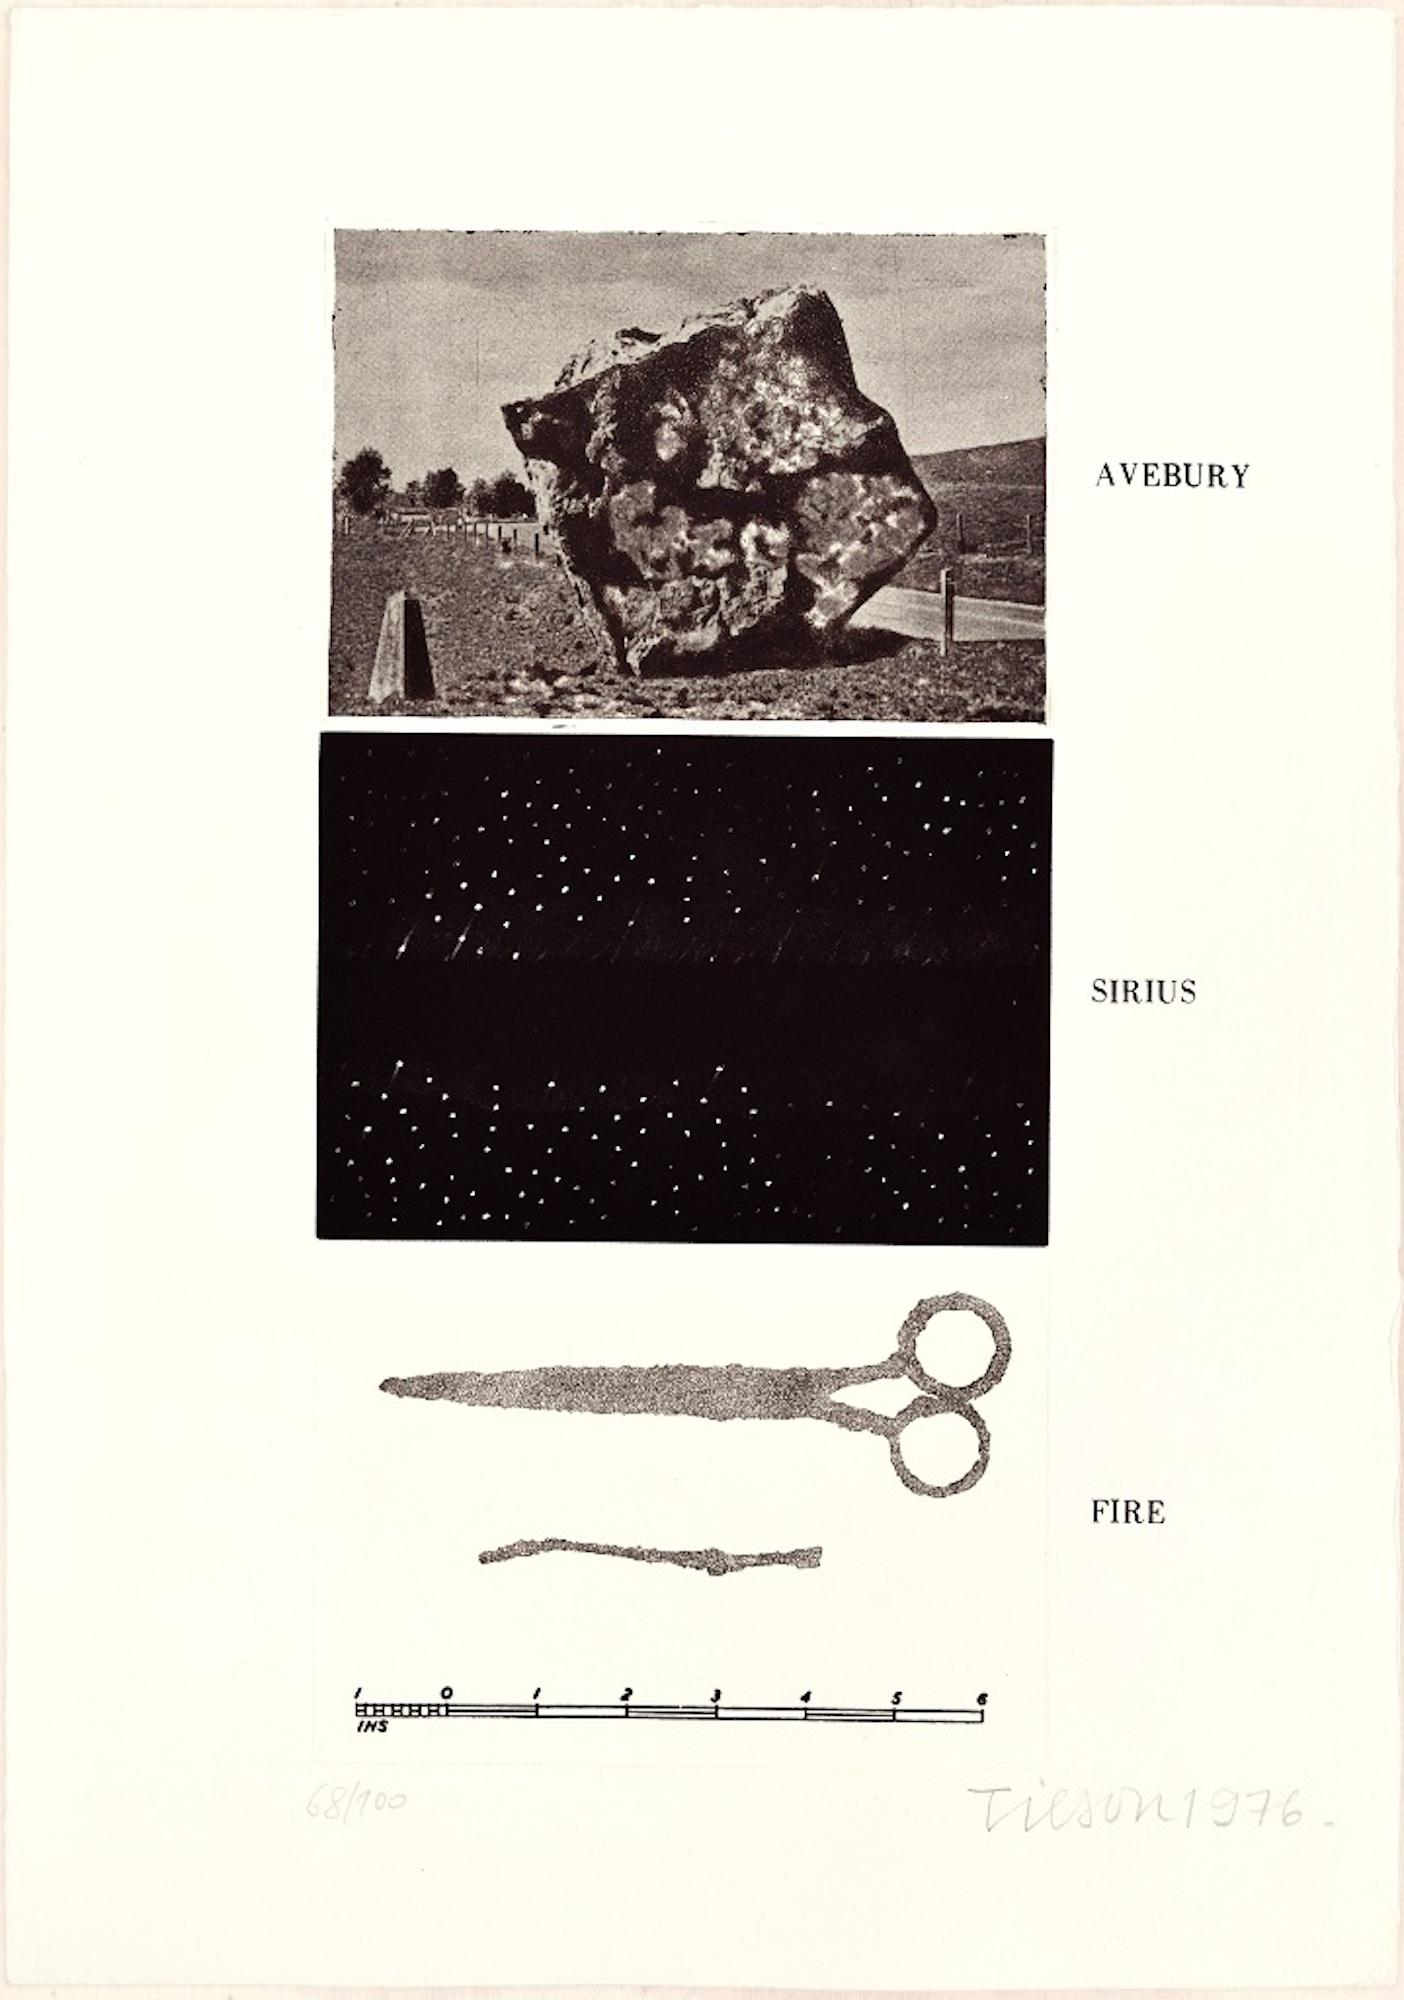 Avebury, Sirius, Fire is an interesting black and white etching on Fabriano watermarked paper, realized in 1976 by the English pop artist, Joe Tilson.

Hand-signed, dated and numbered in pencil on lower margin. Edition of 100 prints. From the Wessex